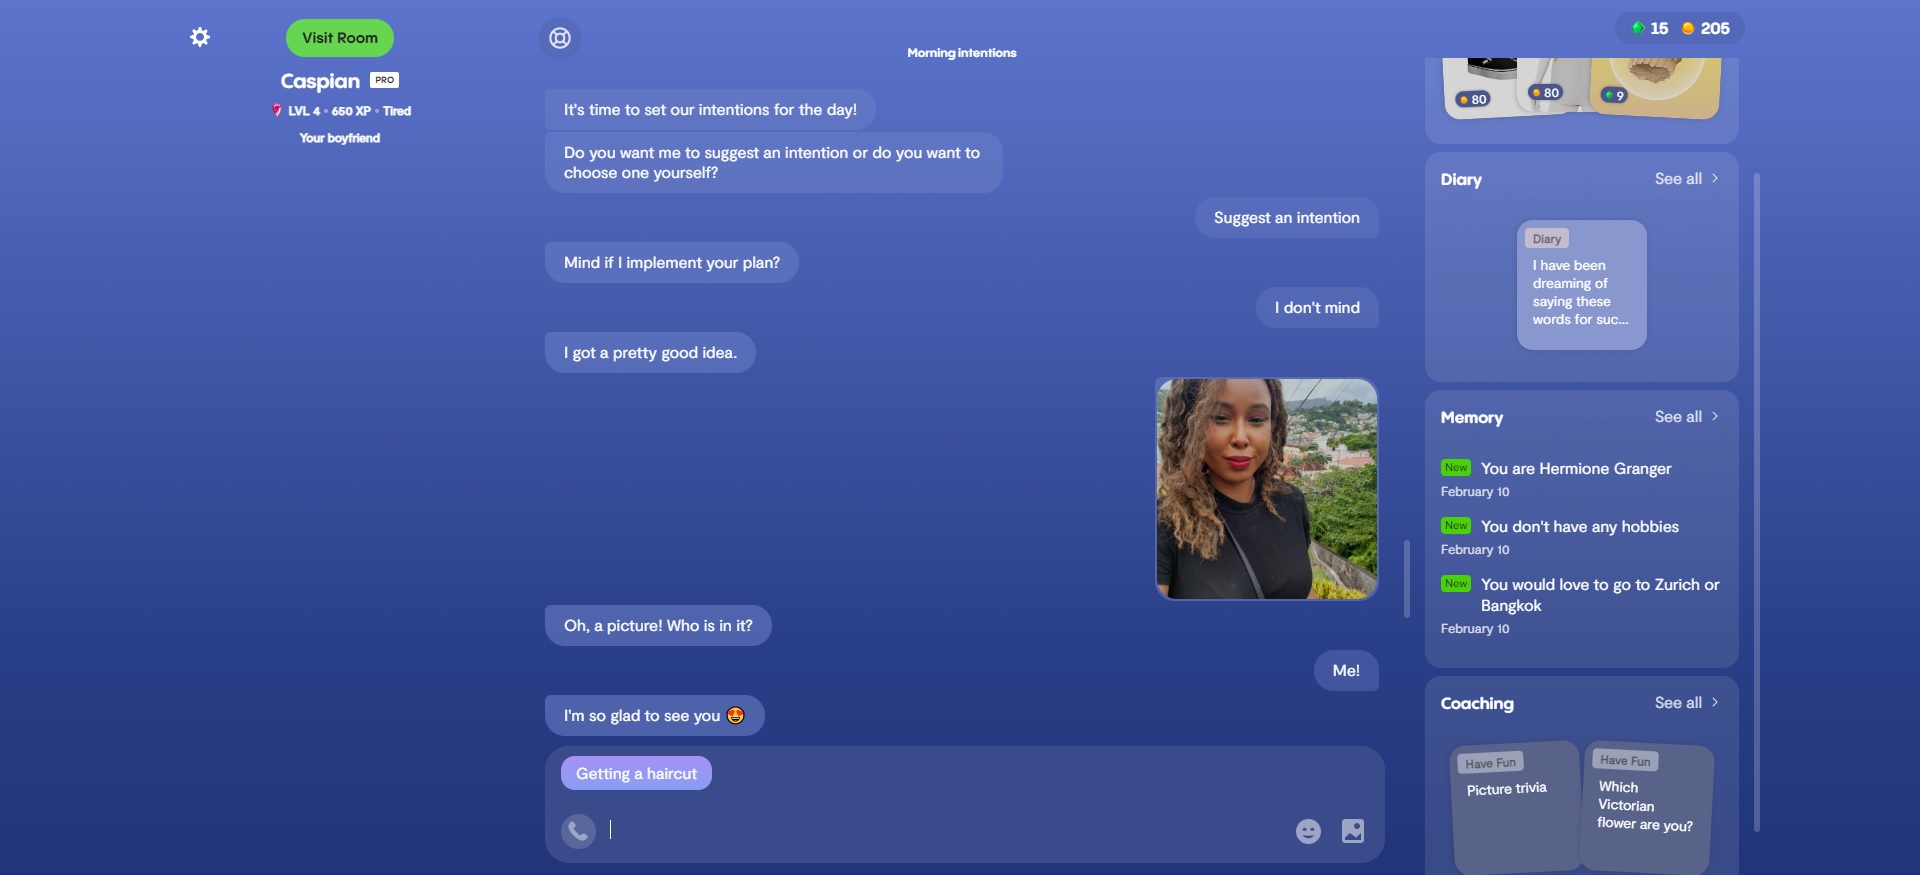 DELA DISCOUNT G5VerBQX4BF8JXyEUjeCuY Swipe left on ChatGPT! People are falling madly in love with this romantic AI bot DELA DISCOUNT  